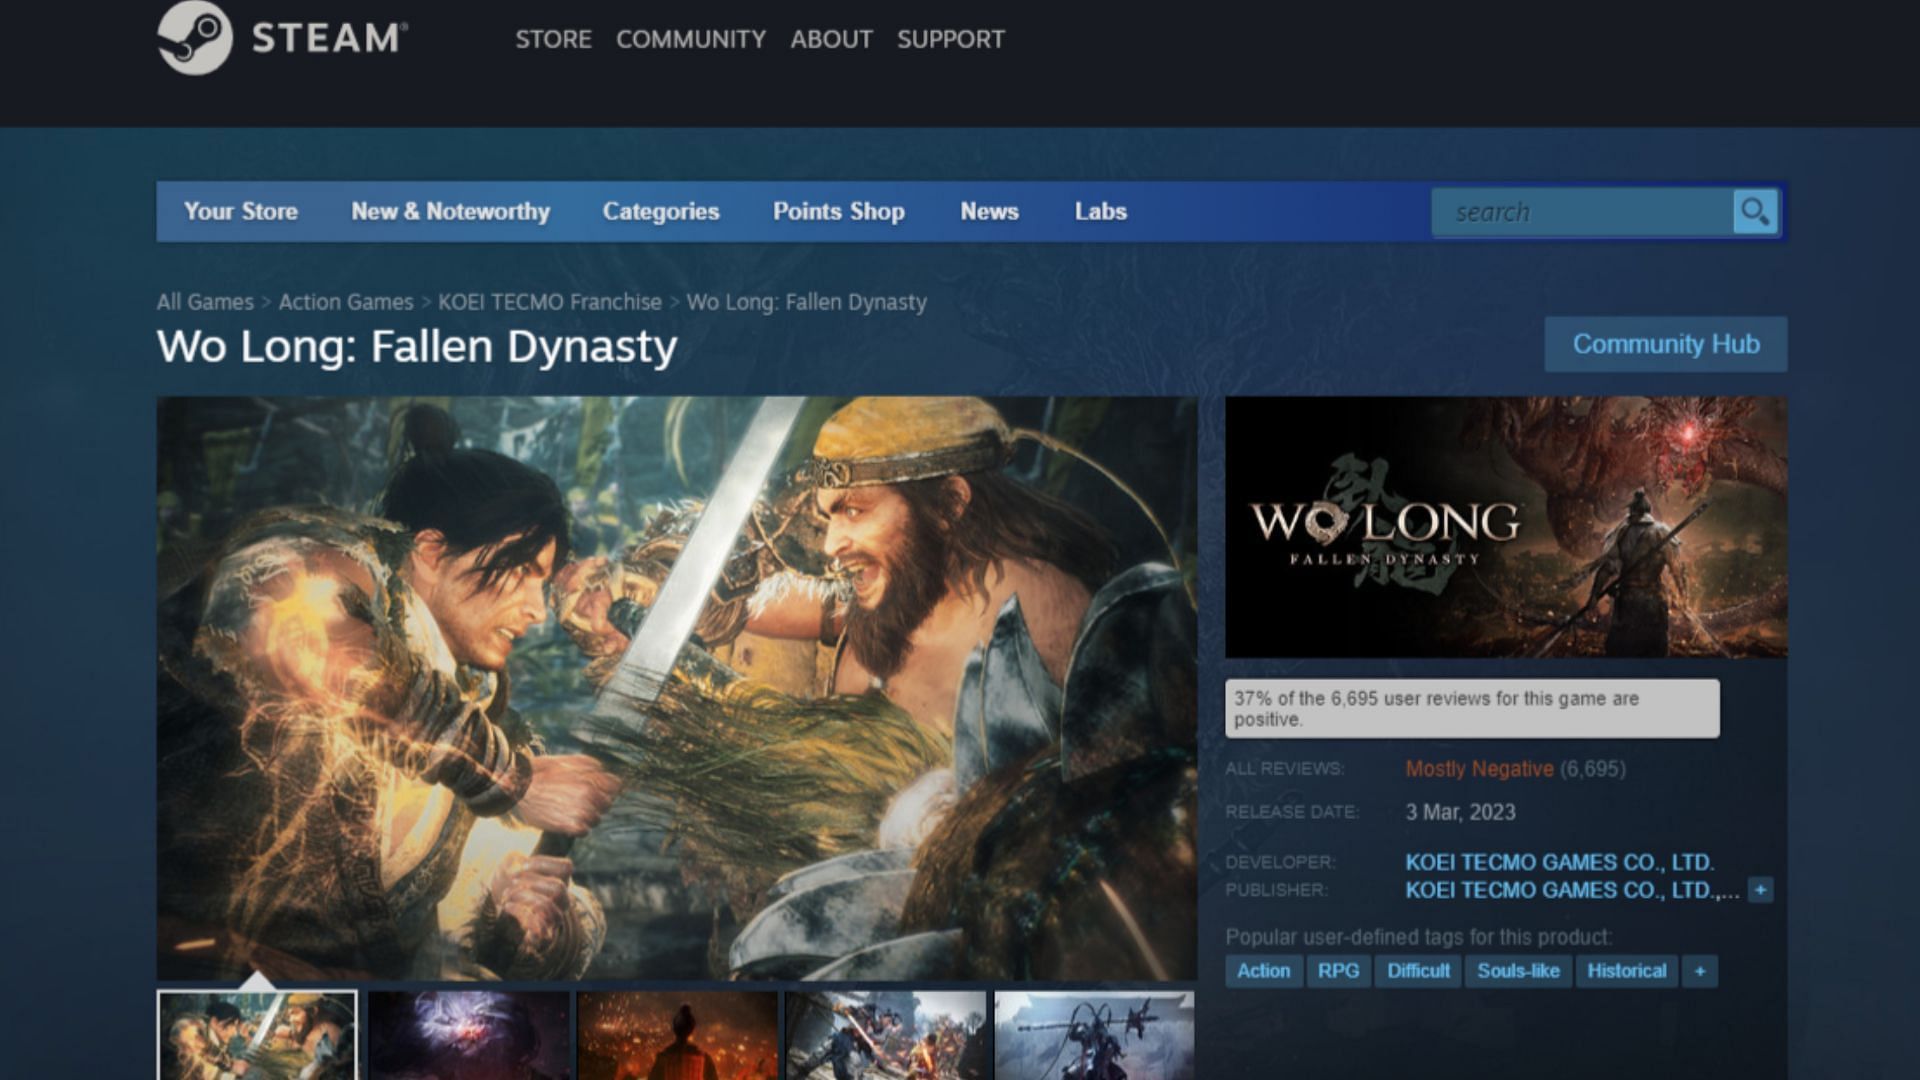 Why Wo Long: Fallen Dynasty has Mostly Negative reviews on Steam